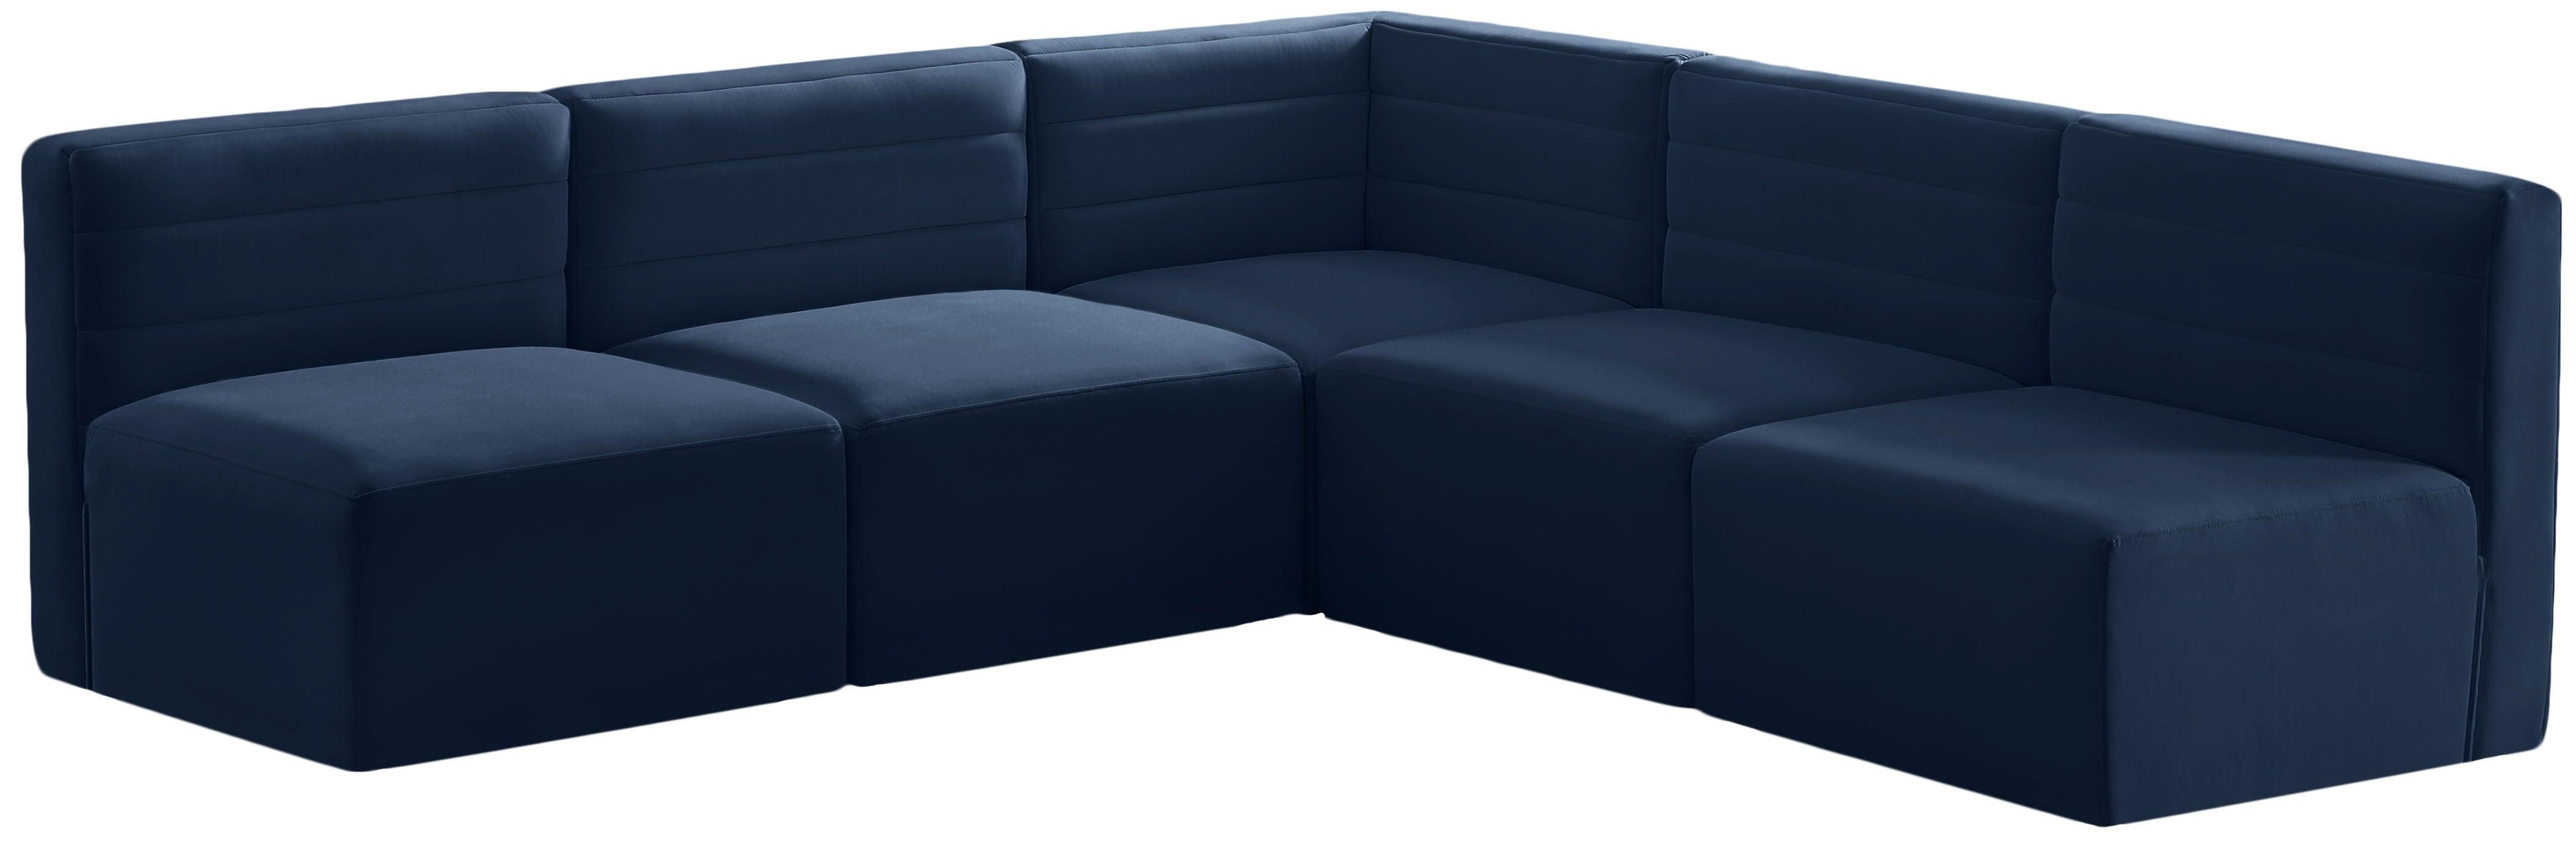 Meridian Furniture - Quincy - Modular Sectional 5 Piece - Navy - Fabric - Modern & Contemporary - 5th Avenue Furniture